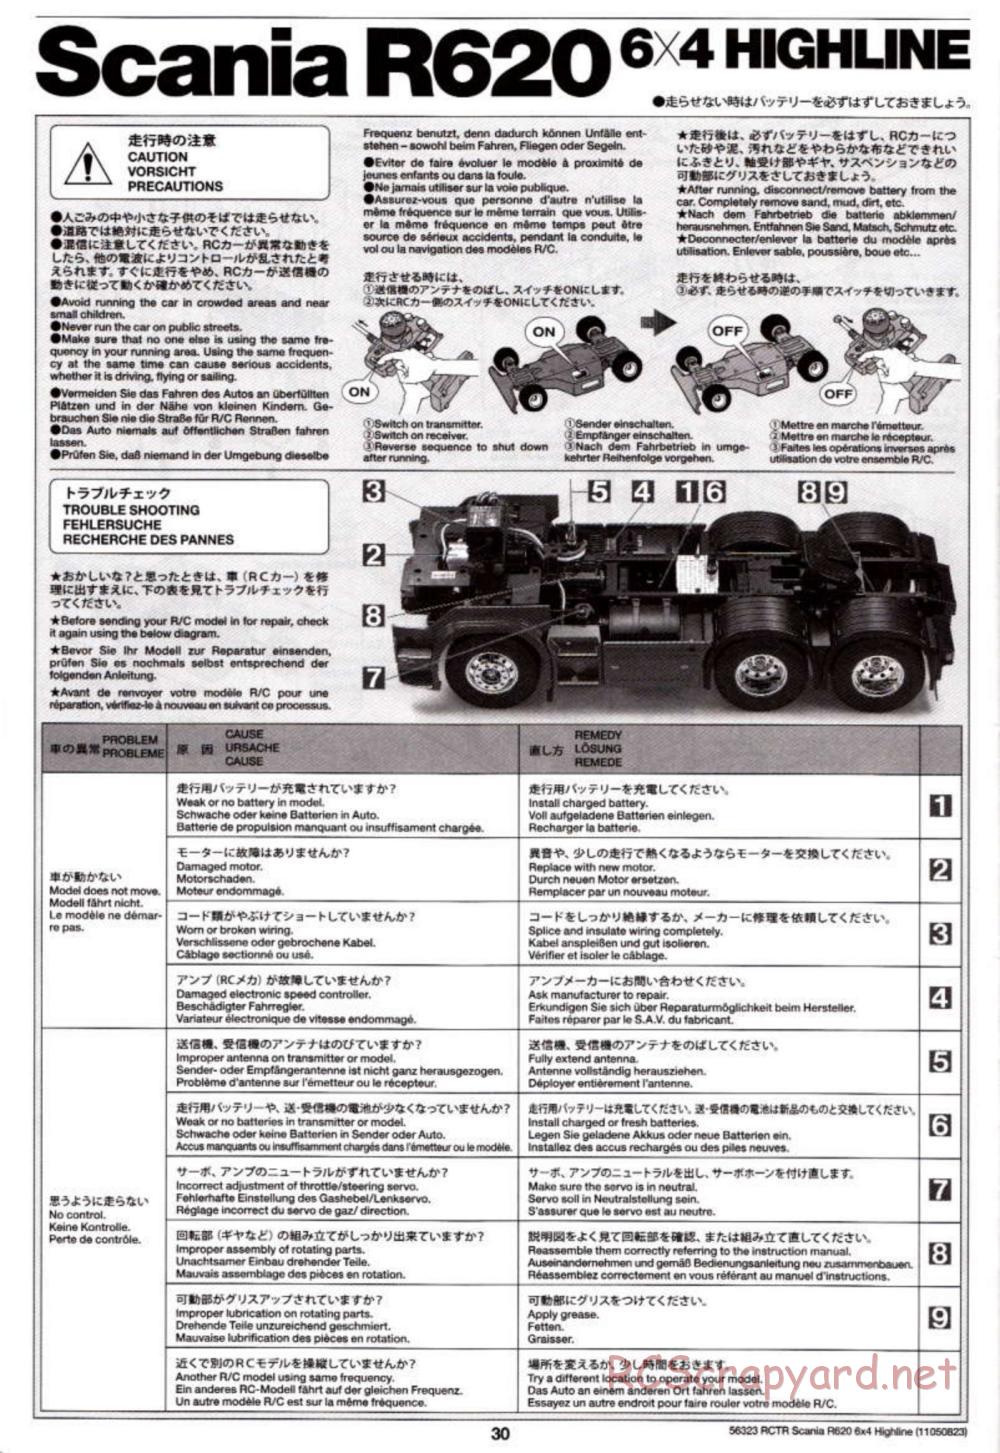 Tamiya - Scania R620 6x4 Highline Tractor Truck Chassis - Manual - Page 30